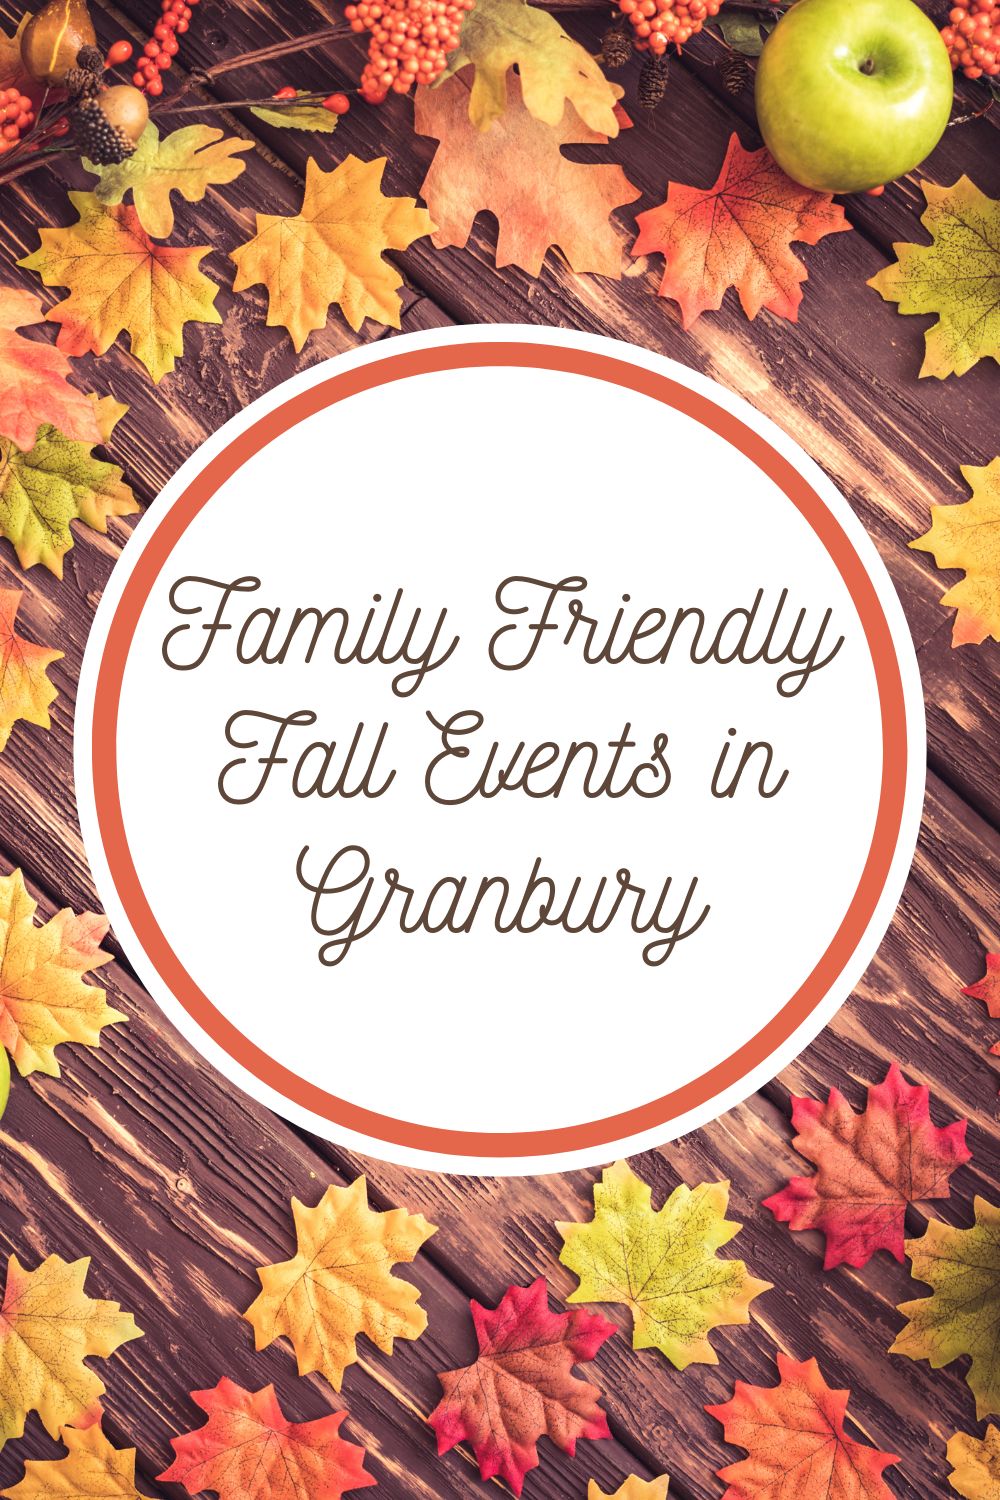 Family Friendly Fall Events in Granbury